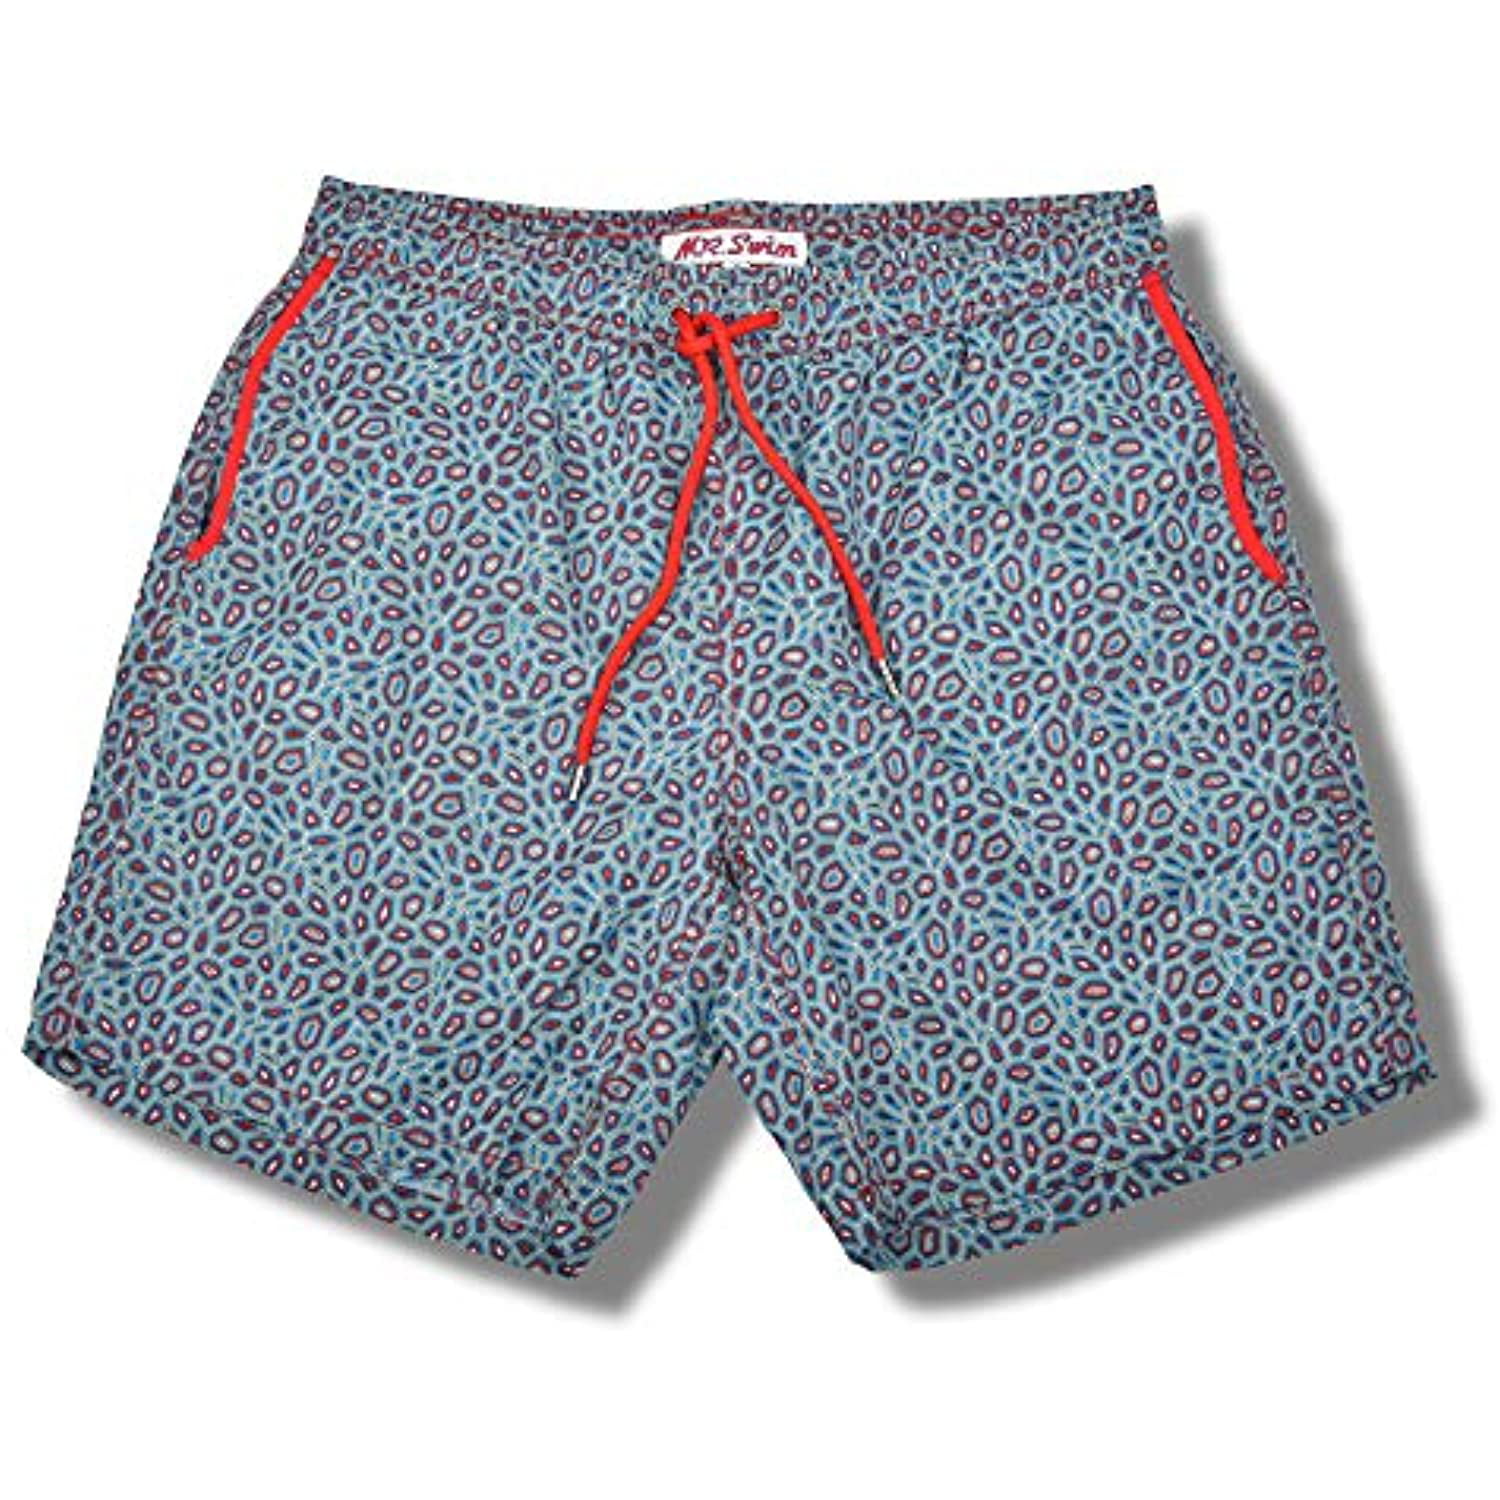 Mr Swim Mens Trunks with Mesh Lining-Quick Dry Swimming Bathing Suit with Pockets